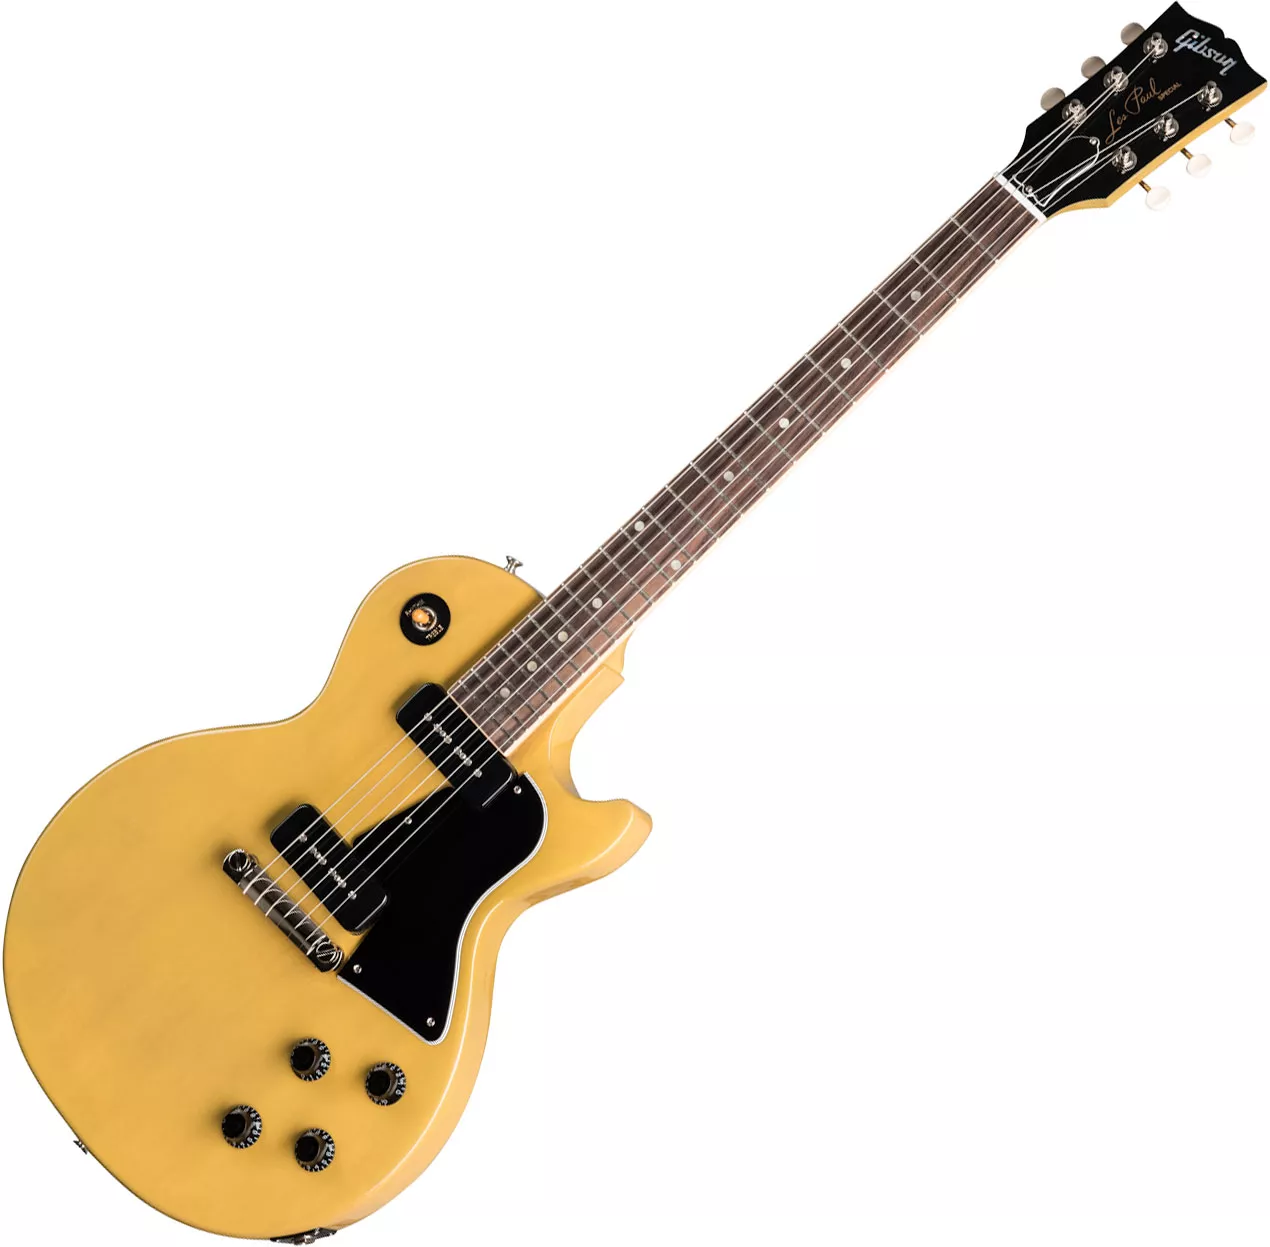 Gibson Les Paul Special - tv yellow Single cut electric guitar yellow